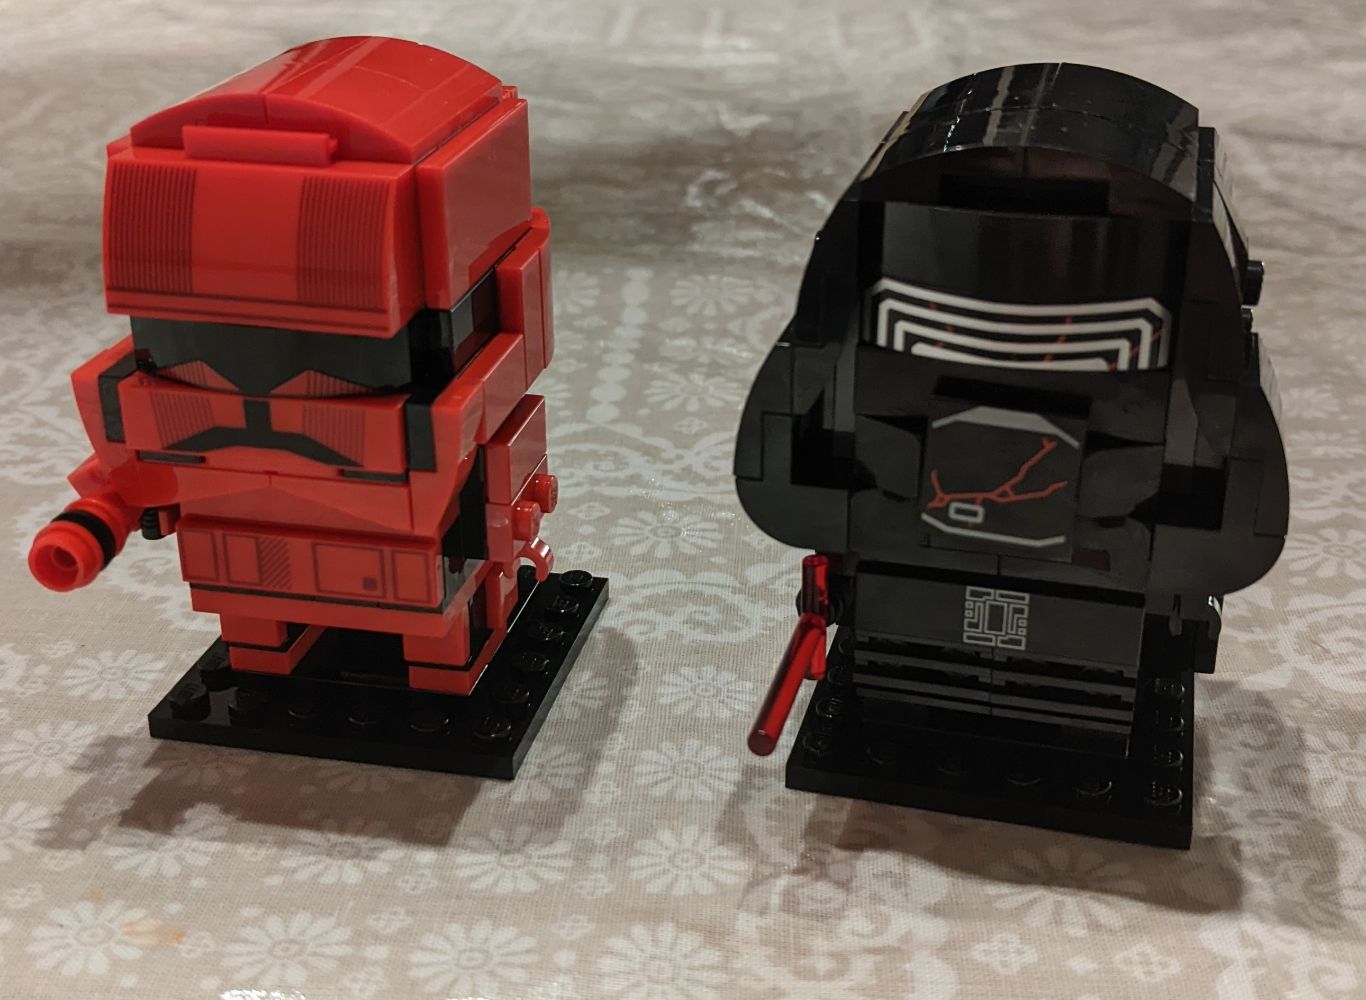 A Lego Brickheadz Sith Trooper and Kylo Ren standing next to each other